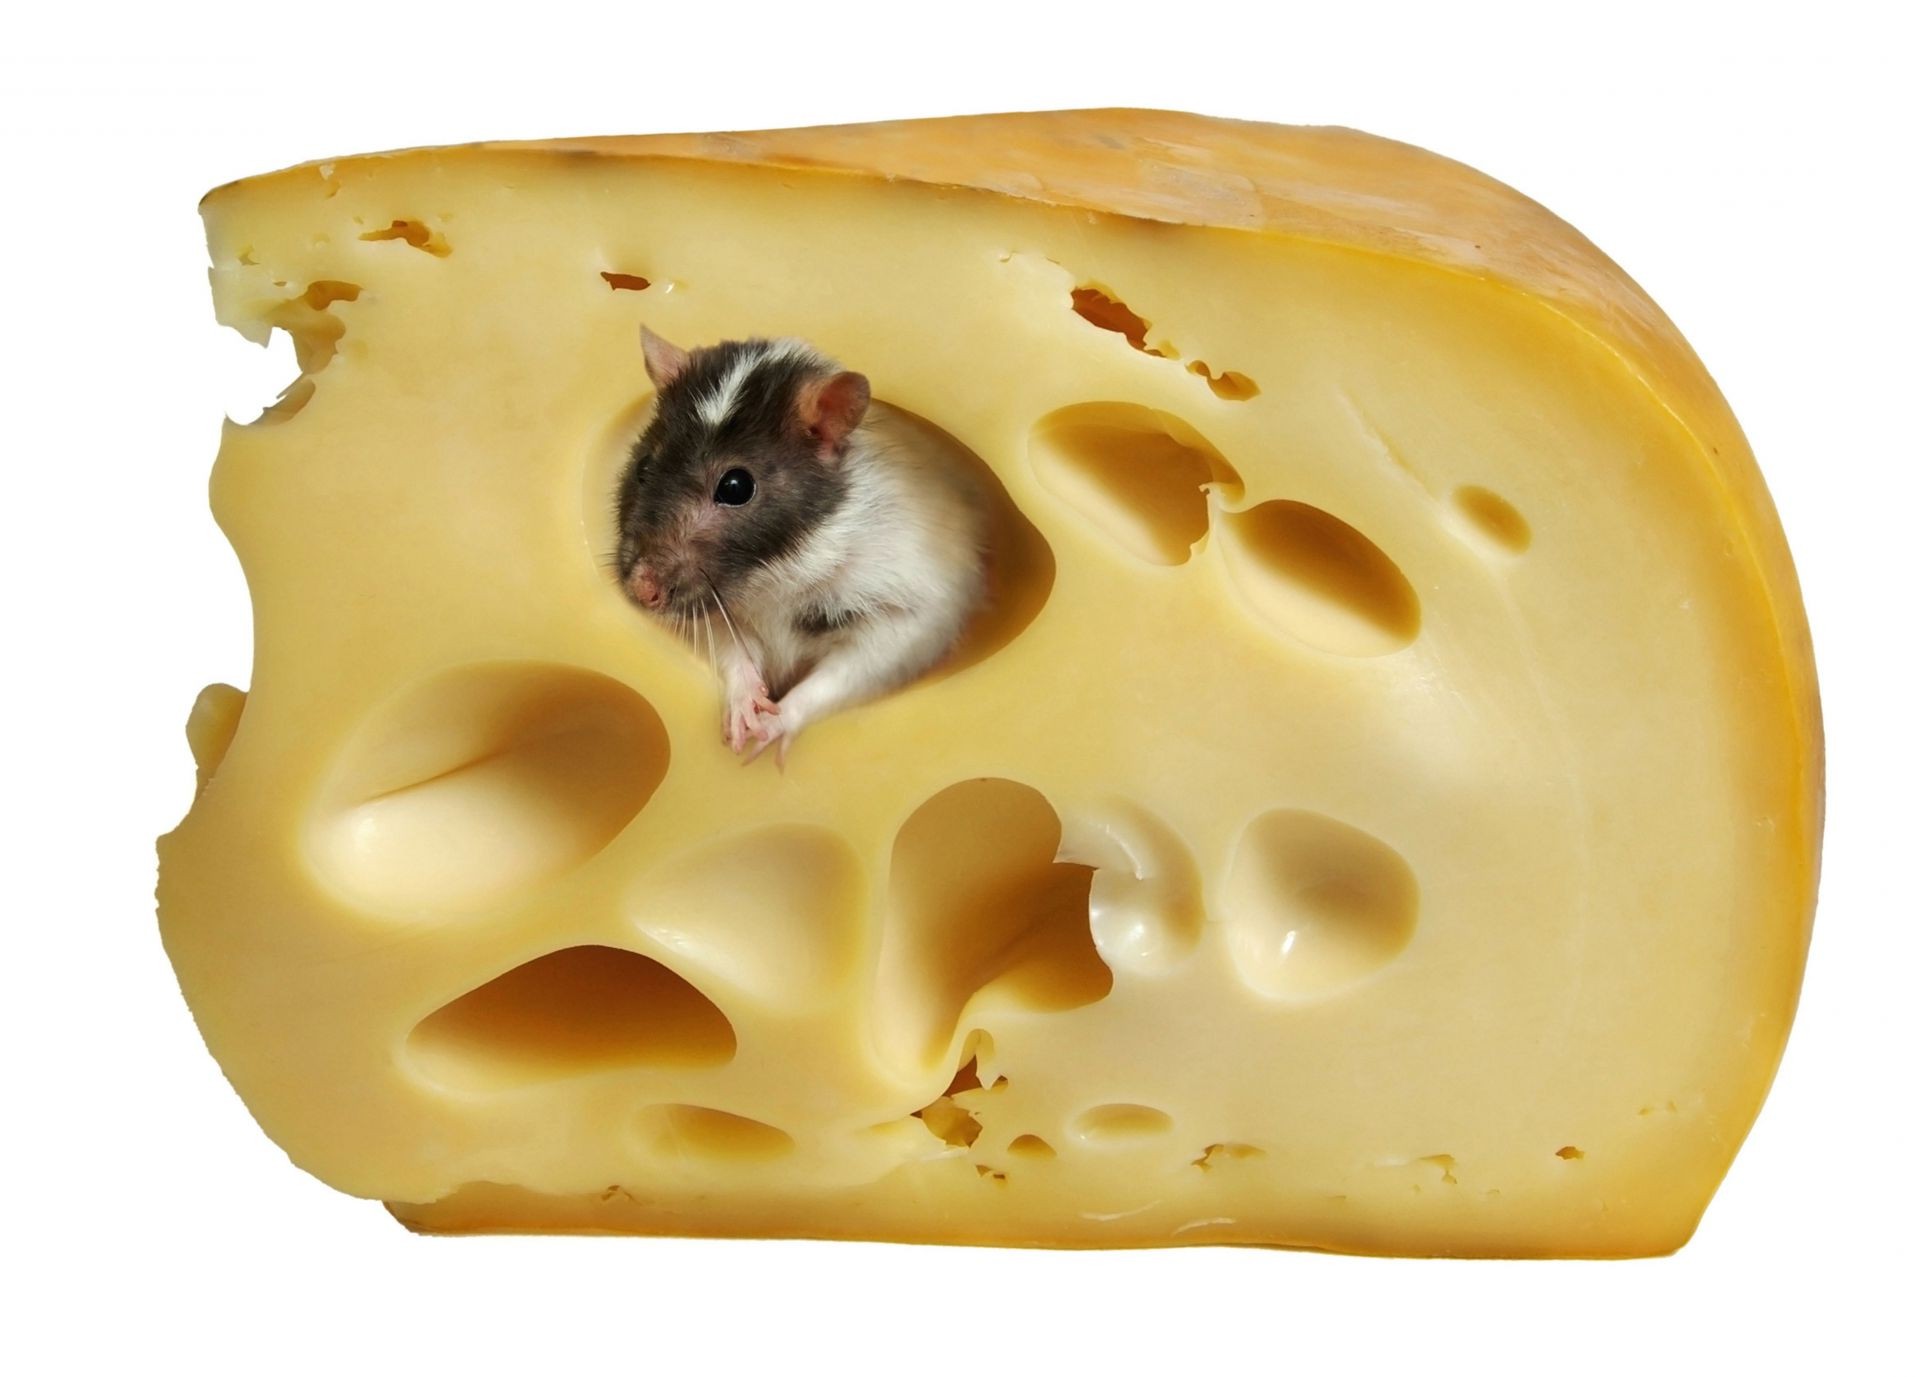 animals cheese food isolated slice dairy refreshment mouse meal epicure tasty rodent delicious breakfast desktop cheddar healthy studio